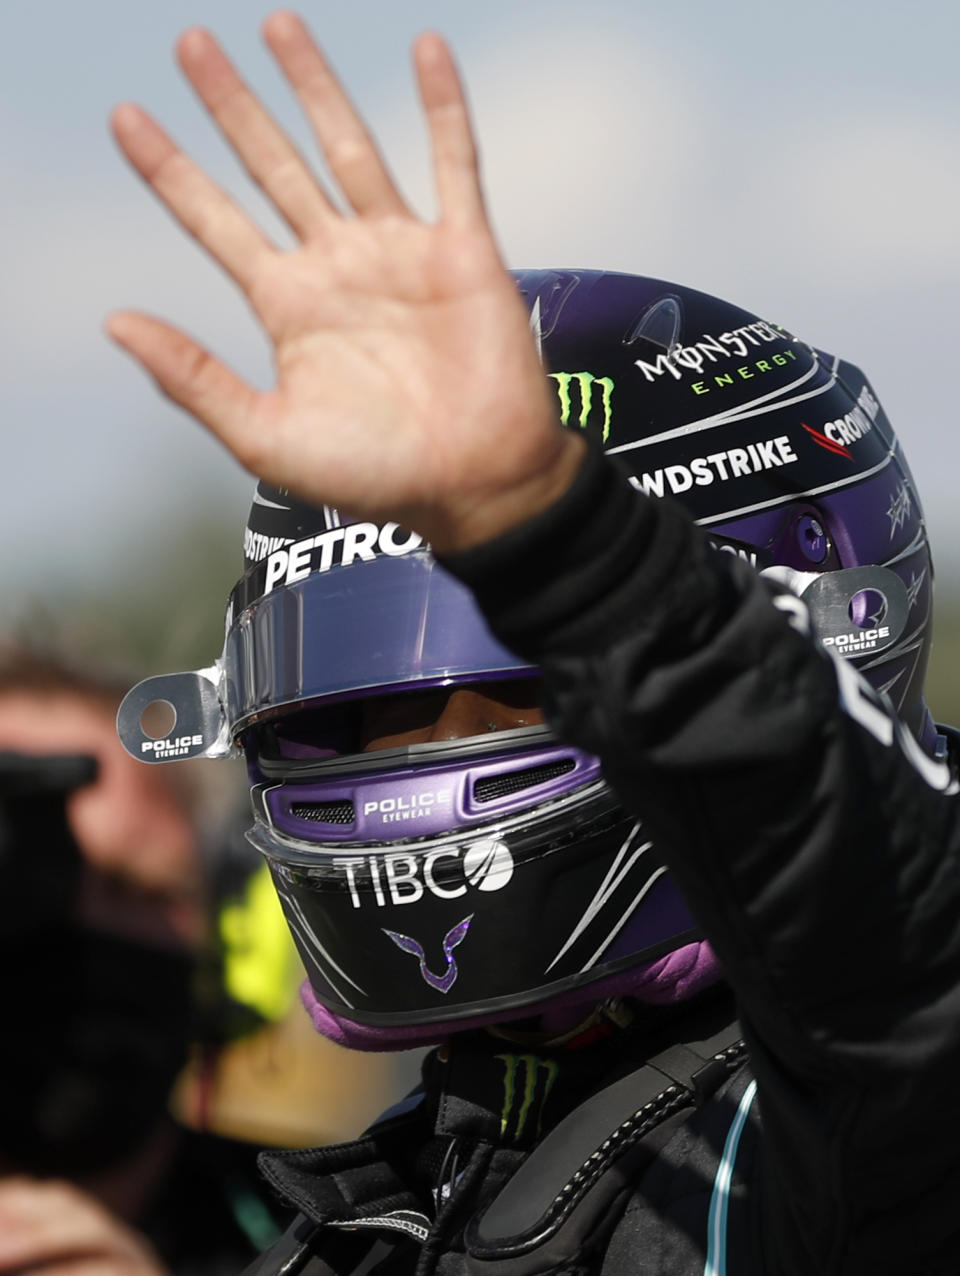 Mercedes driver Lewis Hamilton of Britain celebrates after he clocked the fastest time during the qualifying session for the Hungarian Formula One Grand Prix, at the Hungaroring racetrack in Mogyorod, Hungary, Saturday, July 31, 2021. The Hungarian Formula One Grand Prix will be held on Sunday. (David W Cerny/Pool via AP)